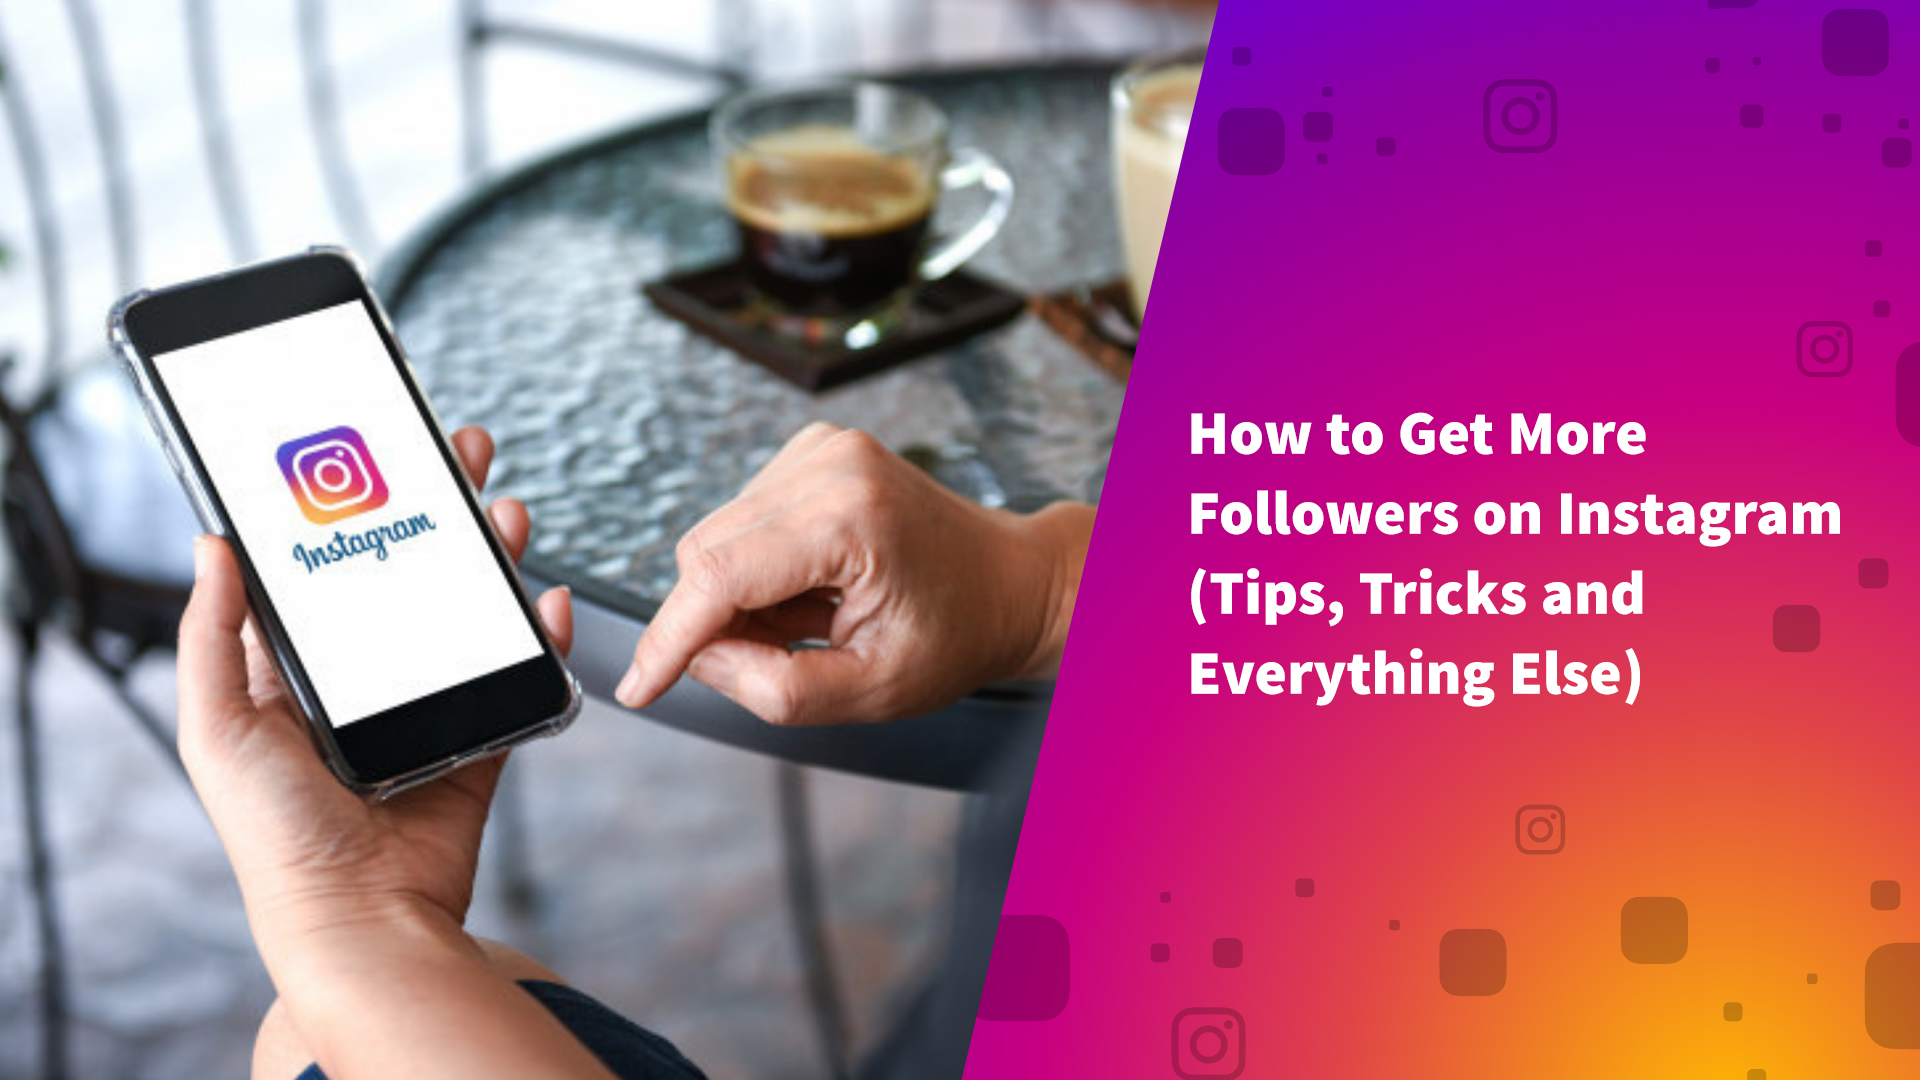 How to Get More Followers on Instagram (Tips, Tricks and ... - 1920 x 1080 jpeg 635kB